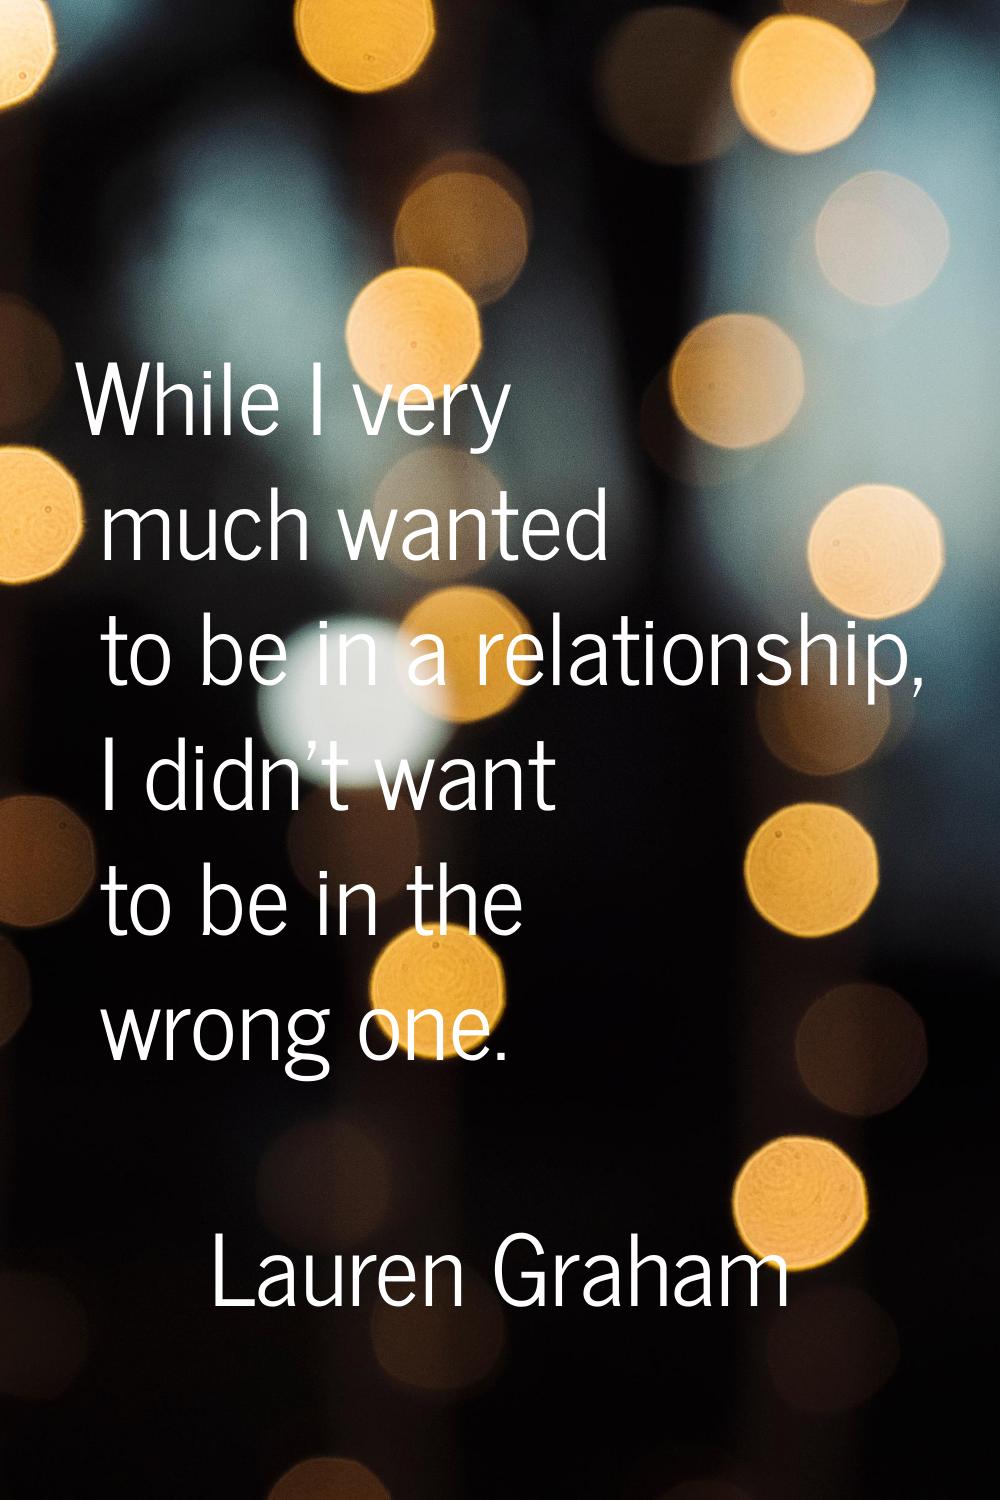 While I very much wanted to be in a relationship, I didn't want to be in the wrong one.